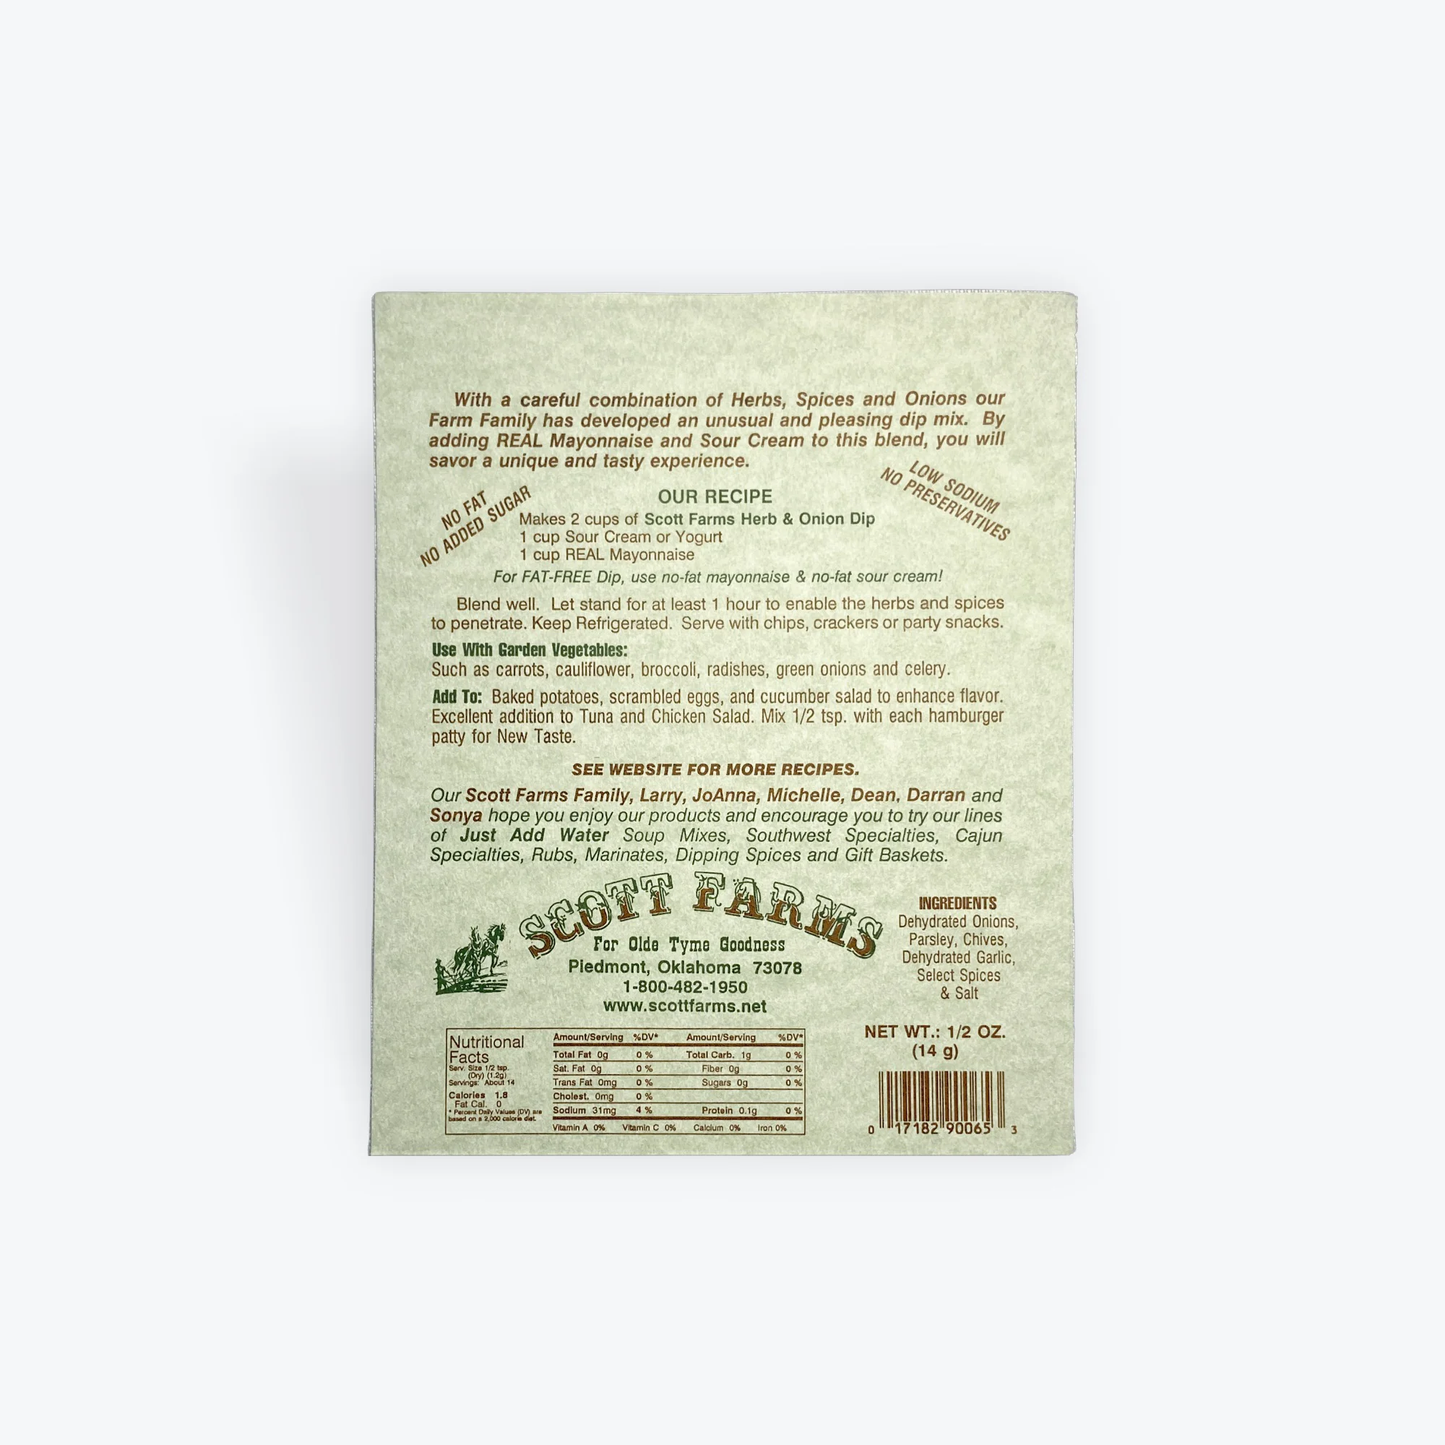 Scott Farms Herb and Onion Dip Mix